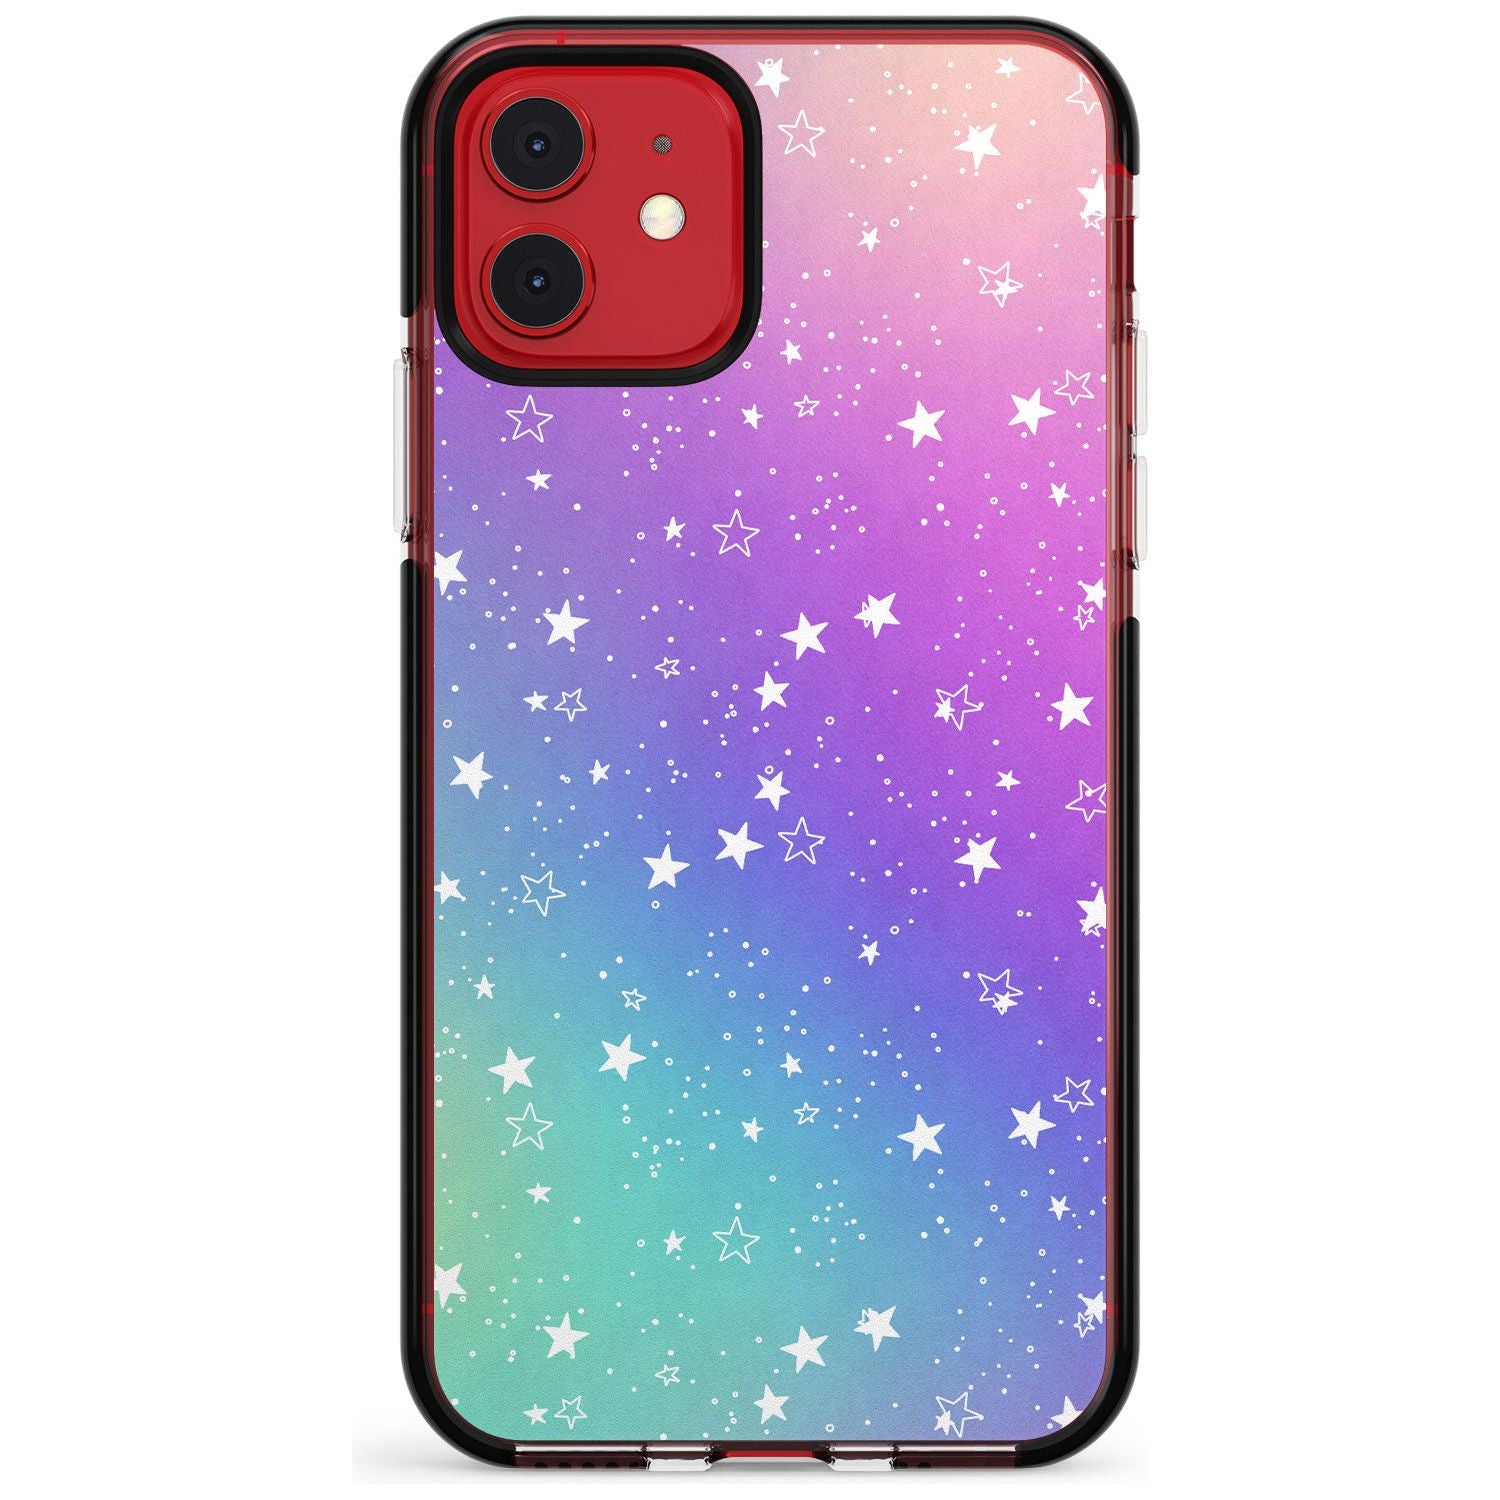 White Stars on Pastels Pink Fade Impact Phone Case for iPhone 11 Pro Max